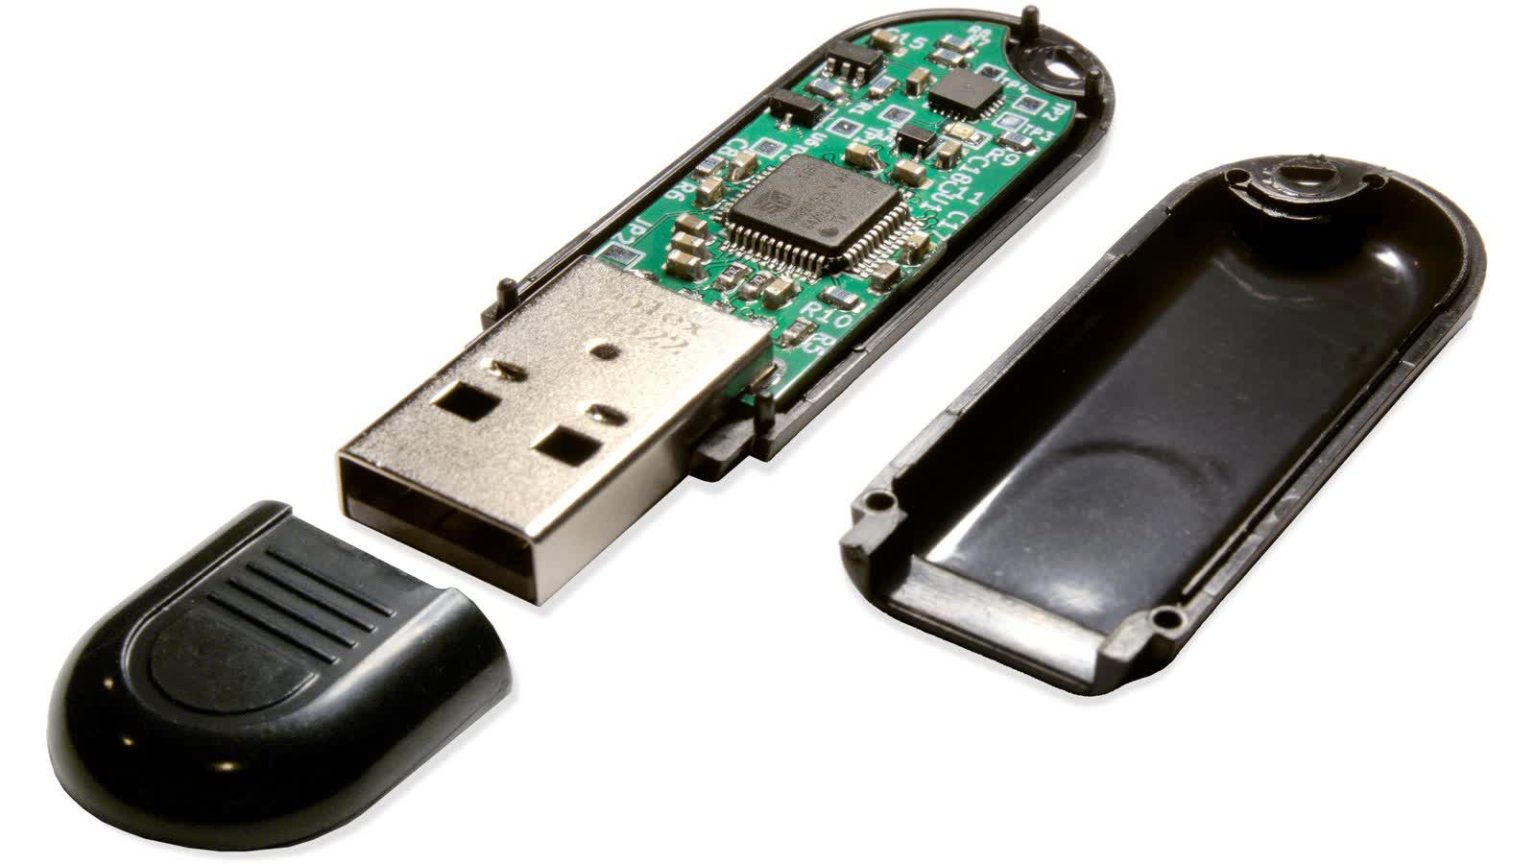 Ovrdrive USB stick with data-hiding and overheating self-destruct features nears crowdfunding goal